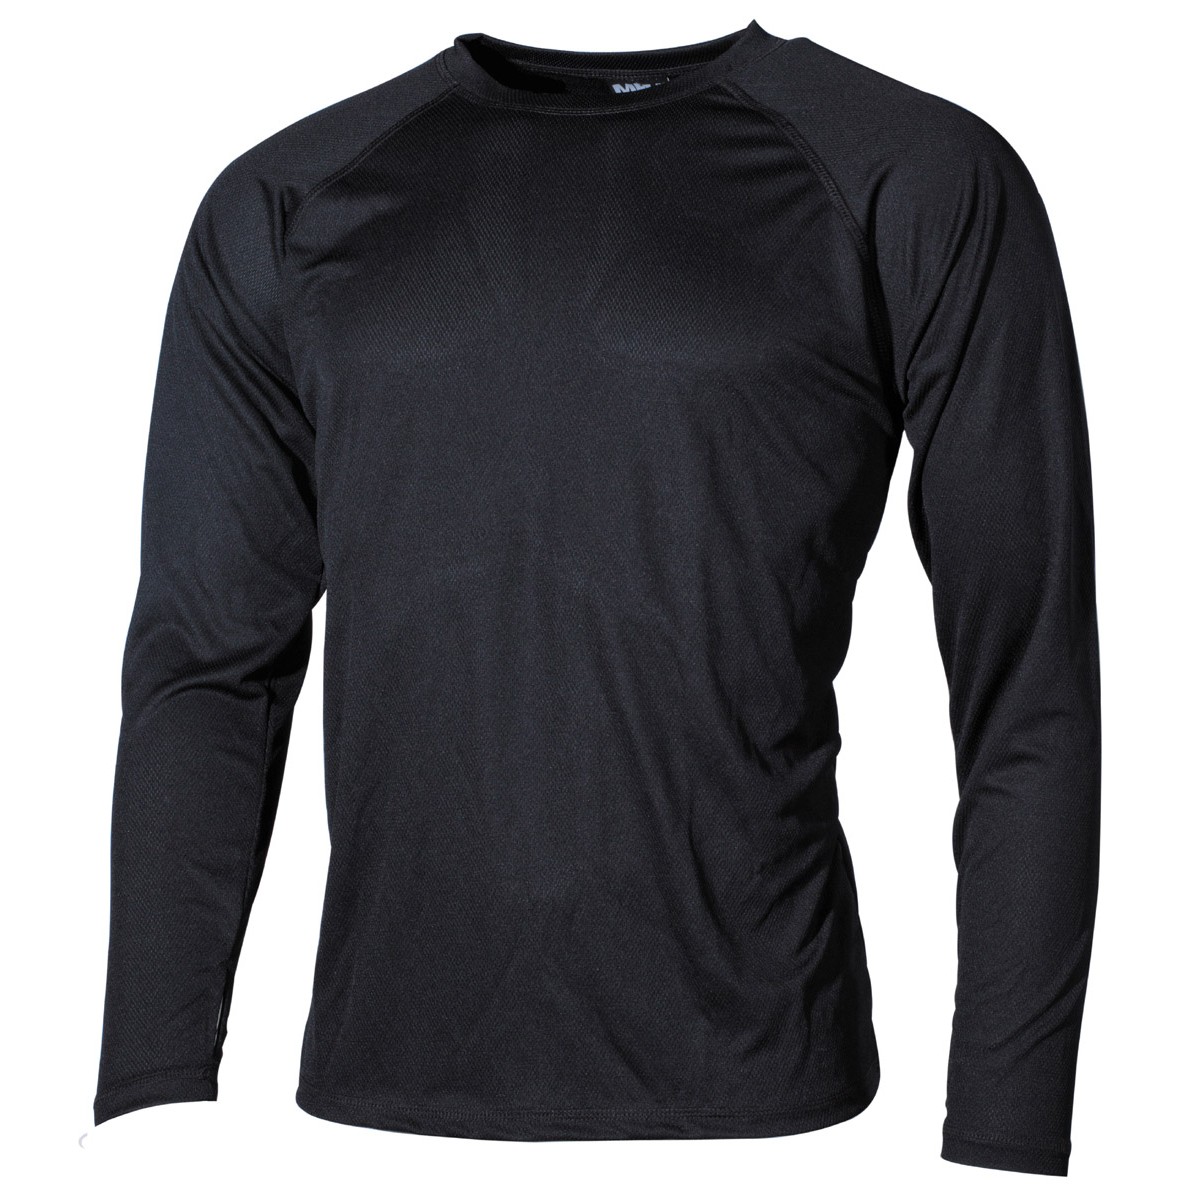 Military/Outdoor Undershirt Level 1 Gen.3 Lightweight and Quick Drying - Black